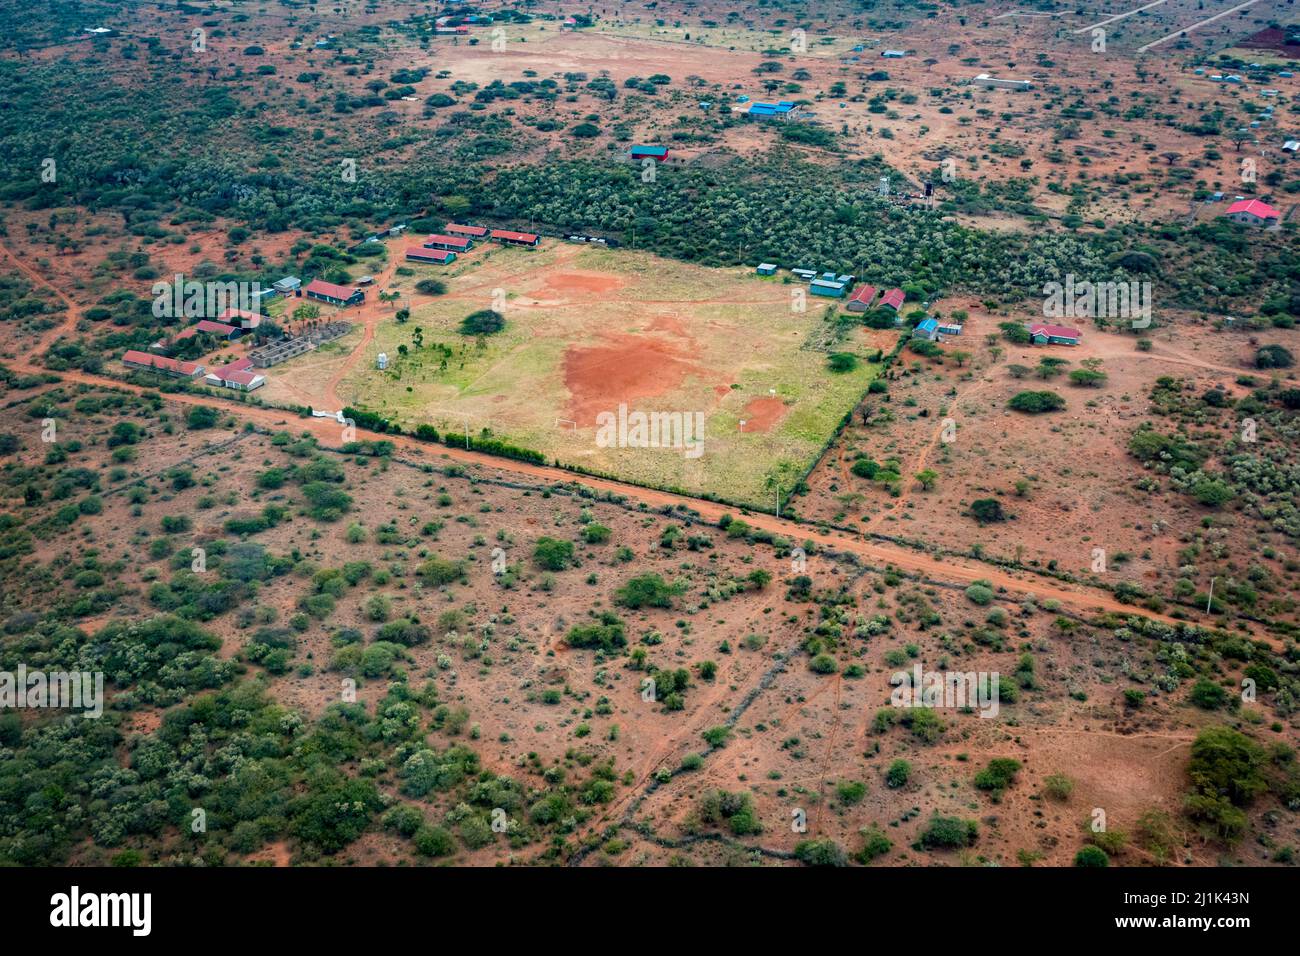 Aerial view of the Ng'arooj Secondary School with it's buildings and playgrounds in the Maasai tribal area in Kenya, East Africa Stock Photo